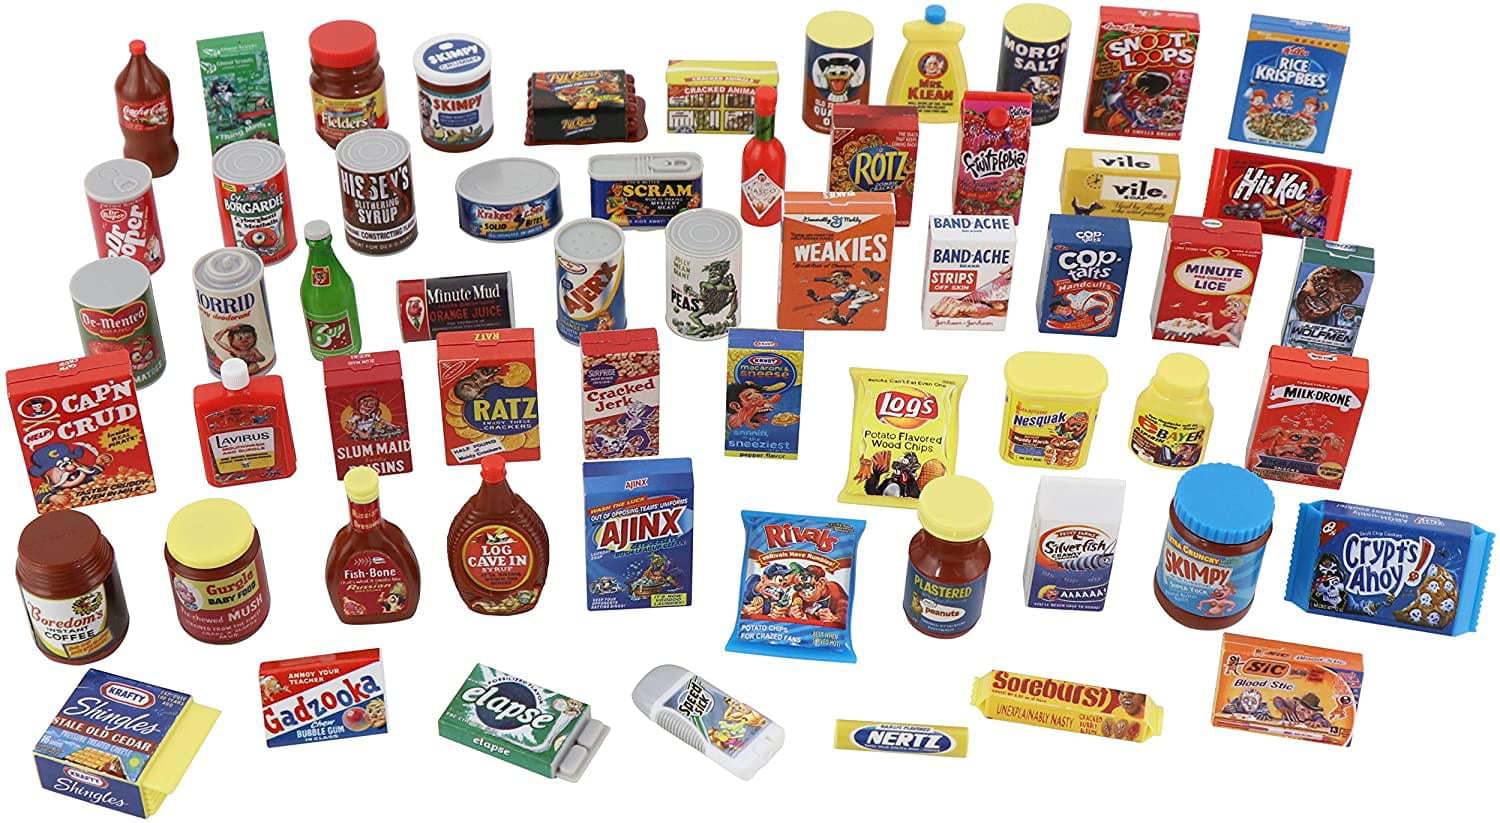 Details about   TOPPS OFFICIAL WACKY PACKAGES MINI SERIES 1 3D PUNY PRODUCTS YOU PICK $1.99 SHIP 